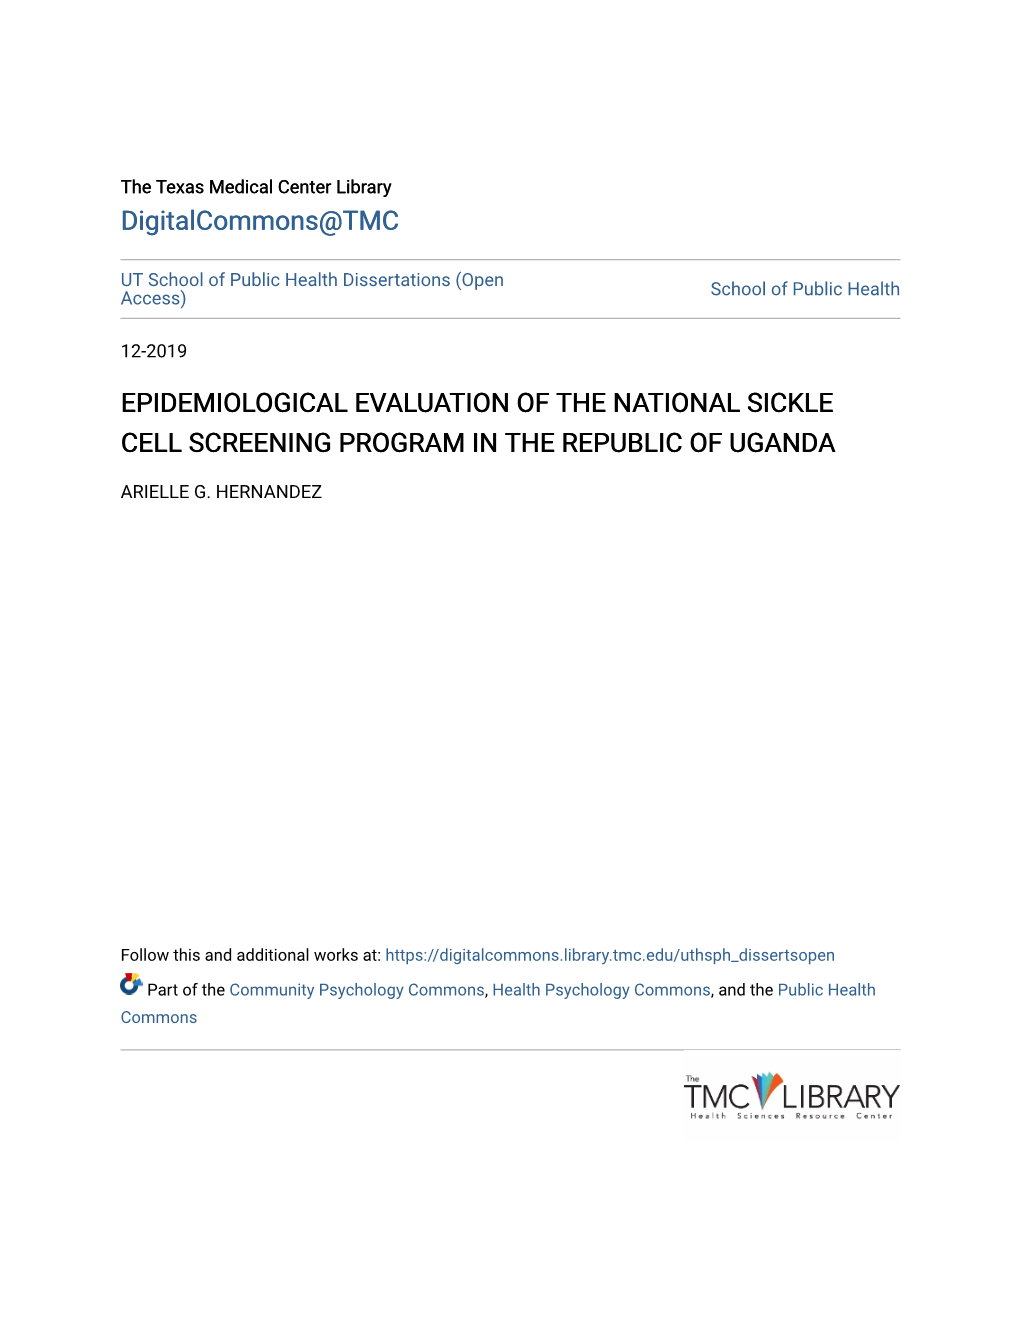 Epidemiological Evaluation of the National Sickle Cell Screening Program in the Republic of Uganda